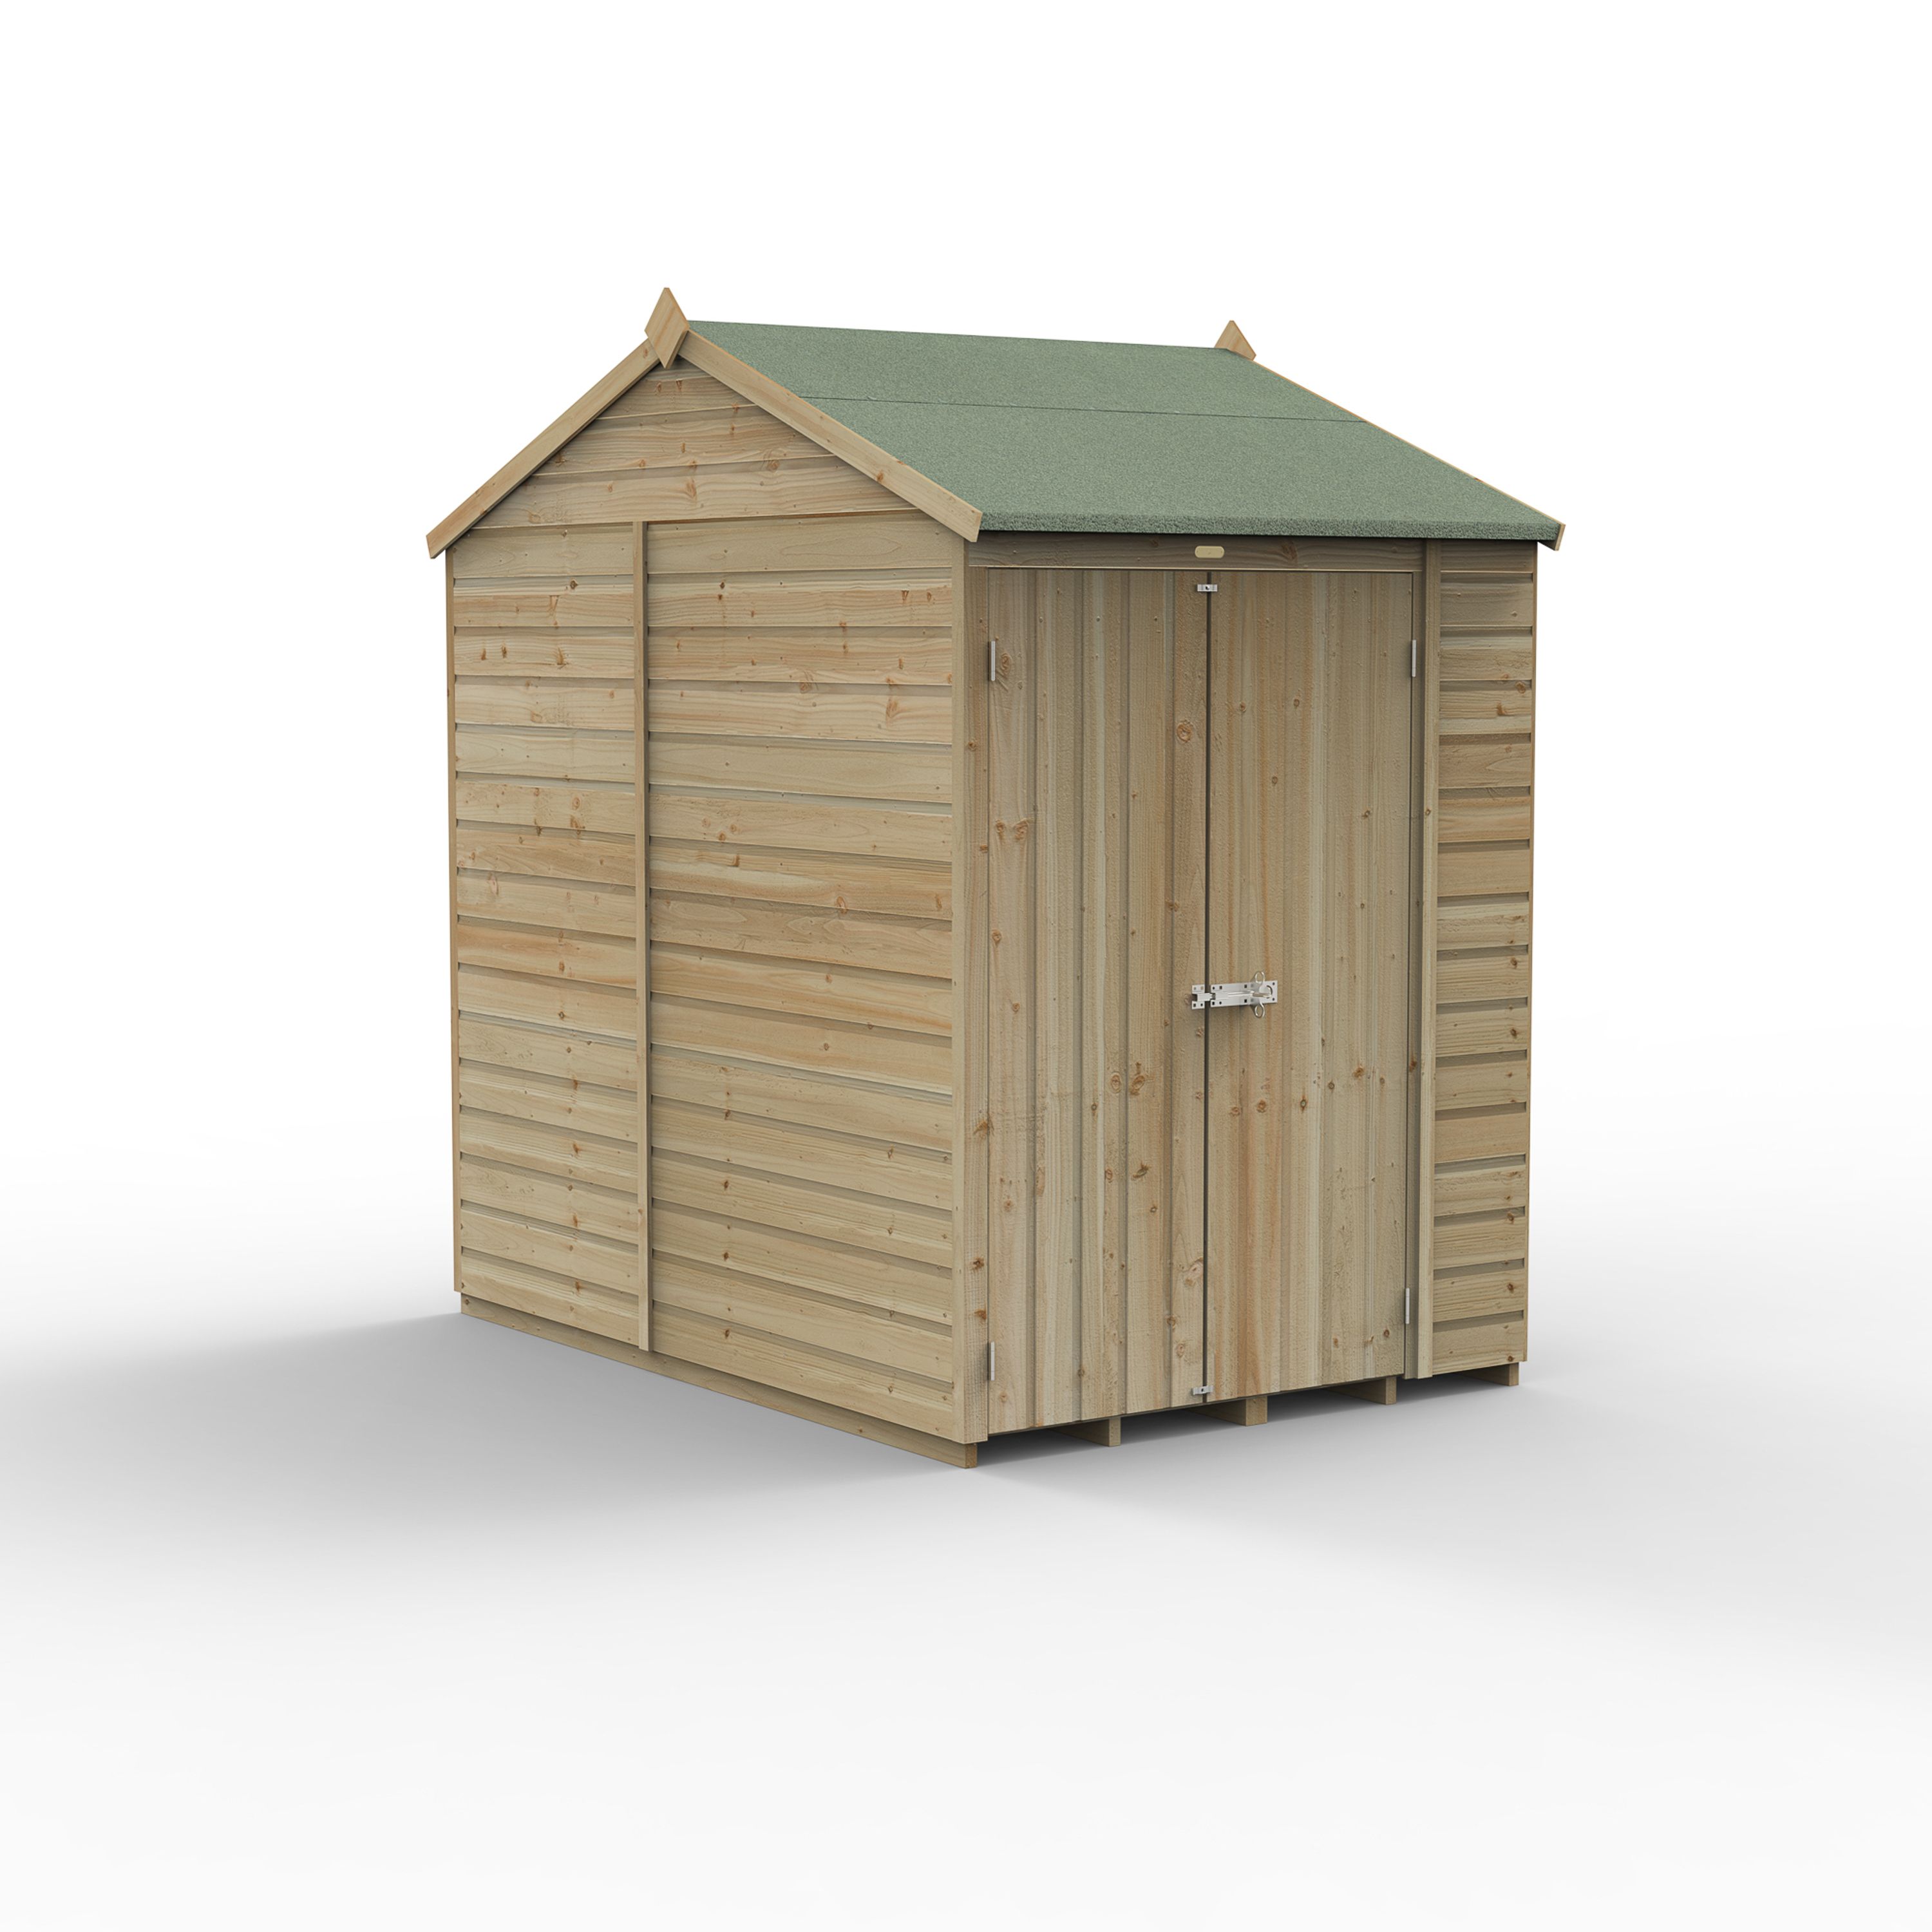 Forest Garden Beckwood 7x5 ft Reverse apex Natural timber Wooden 2 door Shed with floor (Base included) - Assembly not required